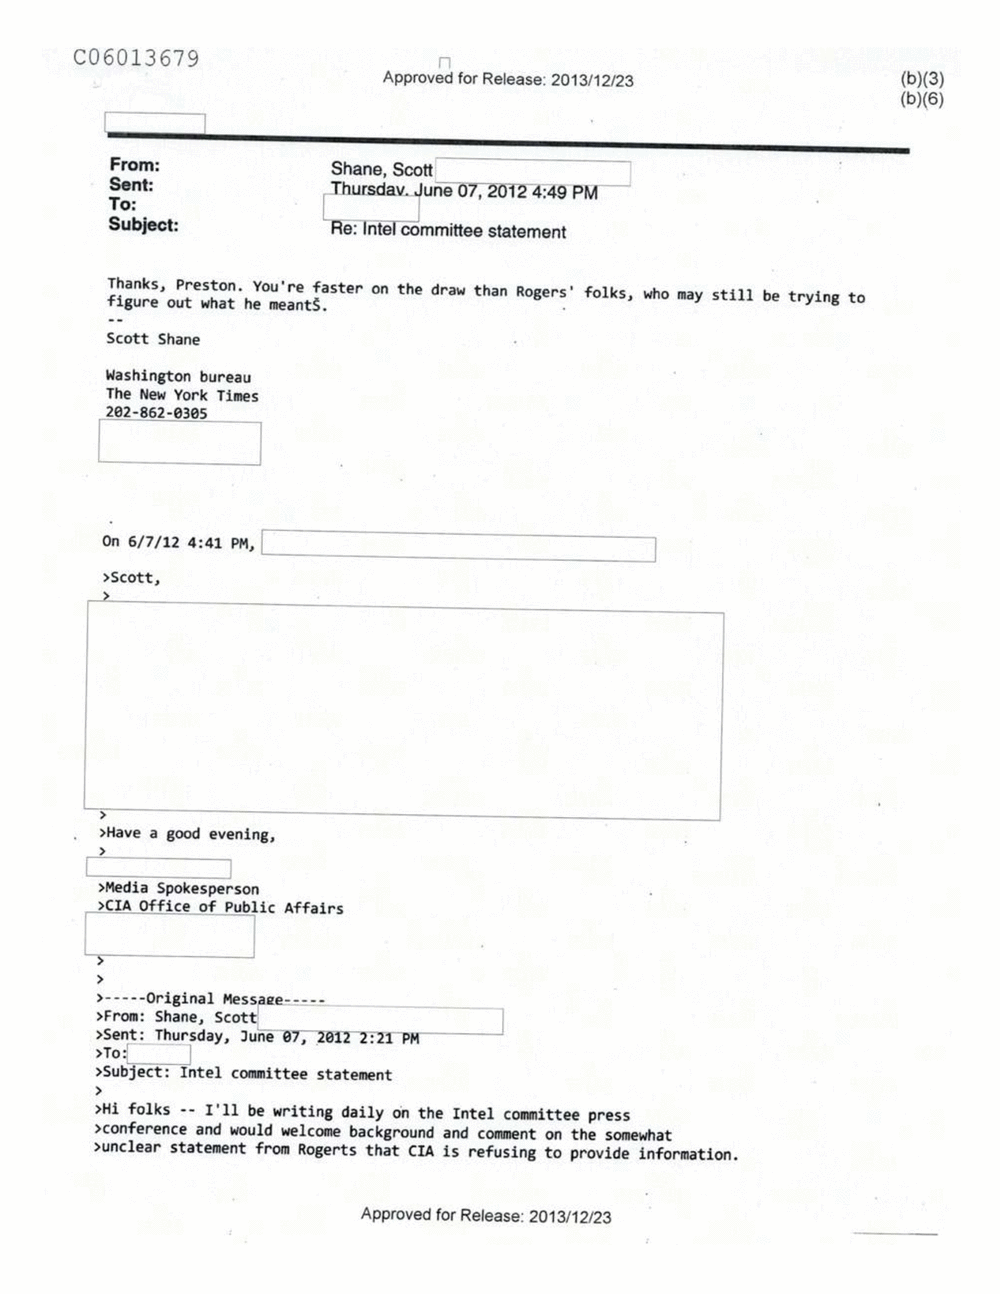 Page 535 from Email Correspondence Between Reporters and CIA Flacks